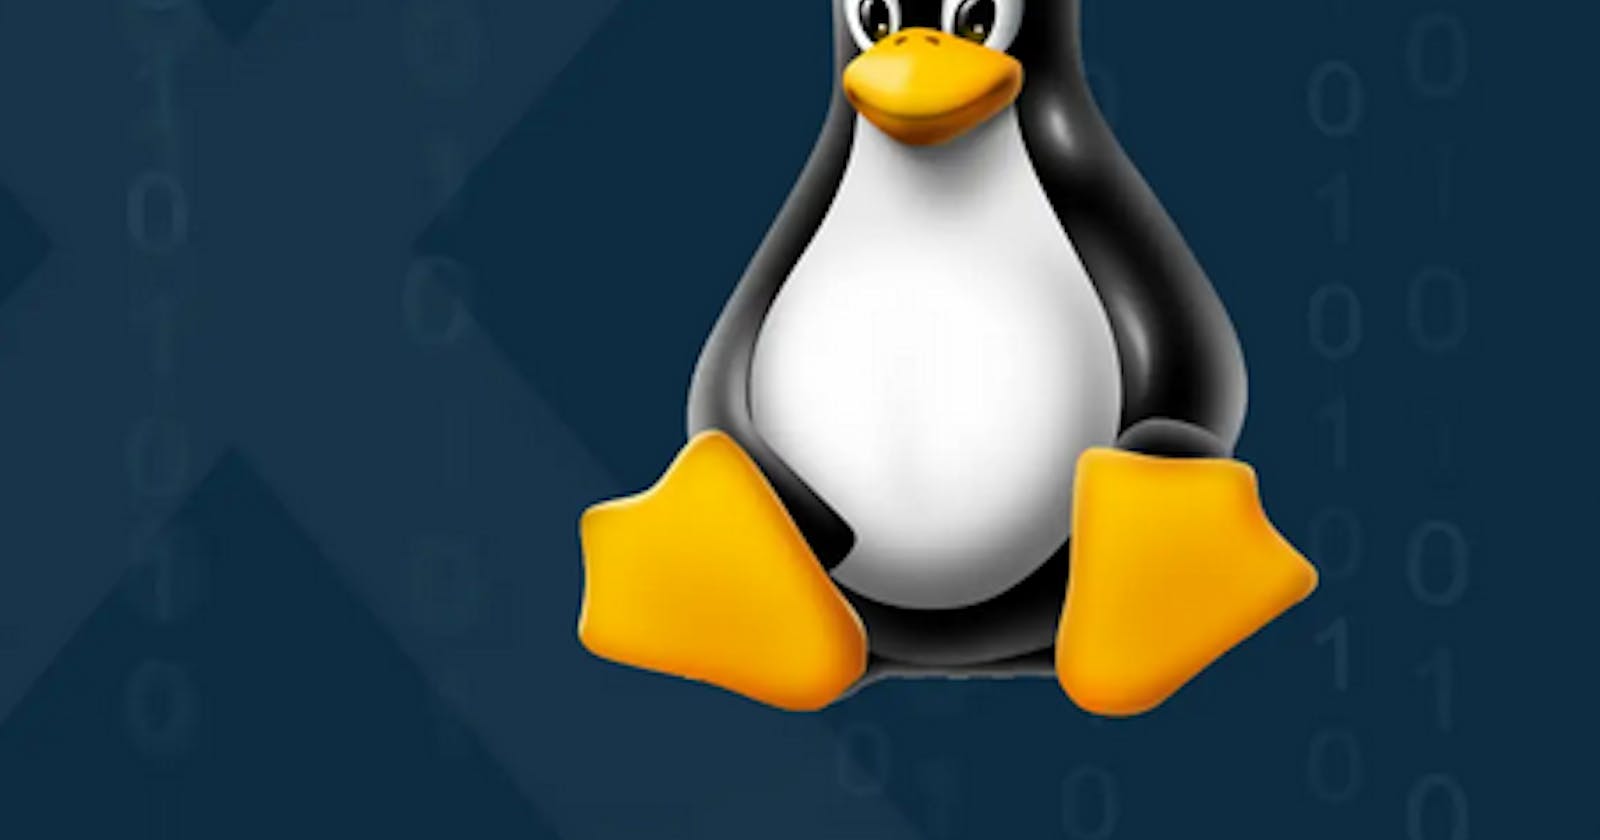 Four (4) deprecated Linux commands and their replacements